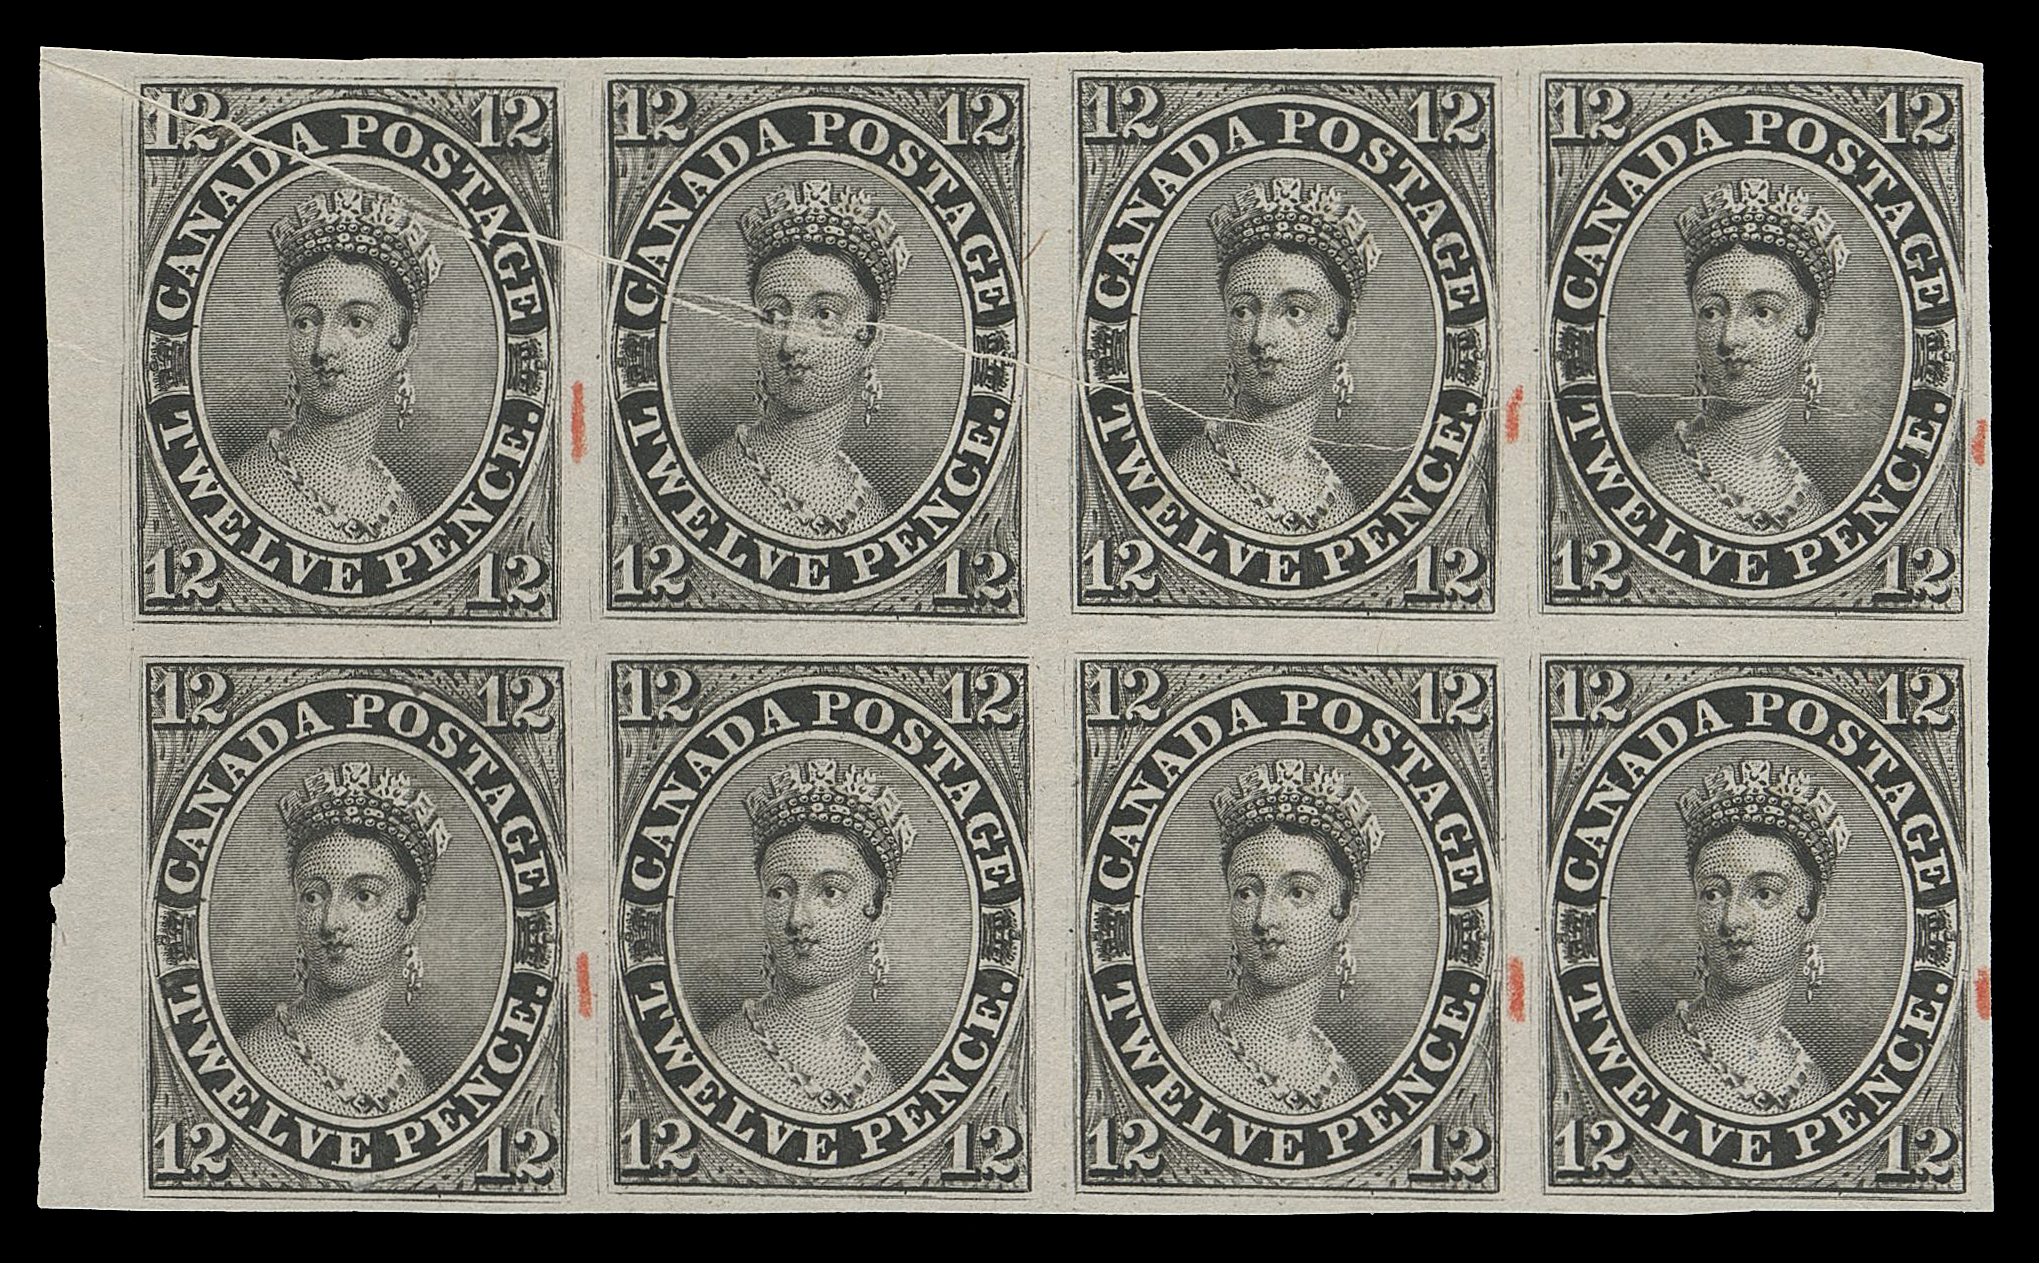 TWELVE PENCE  3,A remarkable plate proof block of eight on india paper with faded diagonal SPECIMEN overprint; being Positions 41-44, 51-55, small red crayon marks in margin apparently denoting plate flaws. Pre-printing paper fold running diagonally on first three proofs in top row, certainly one of the largest surviving proof multiples, VF

Provenance: Dale-Lichtenstein, Sale 2 - British North America, Part One, H.R. Harmer, Inc., November 1968; Lot 54 - originally a block of 60 from which this block originates.
Sam Nickle, Christie